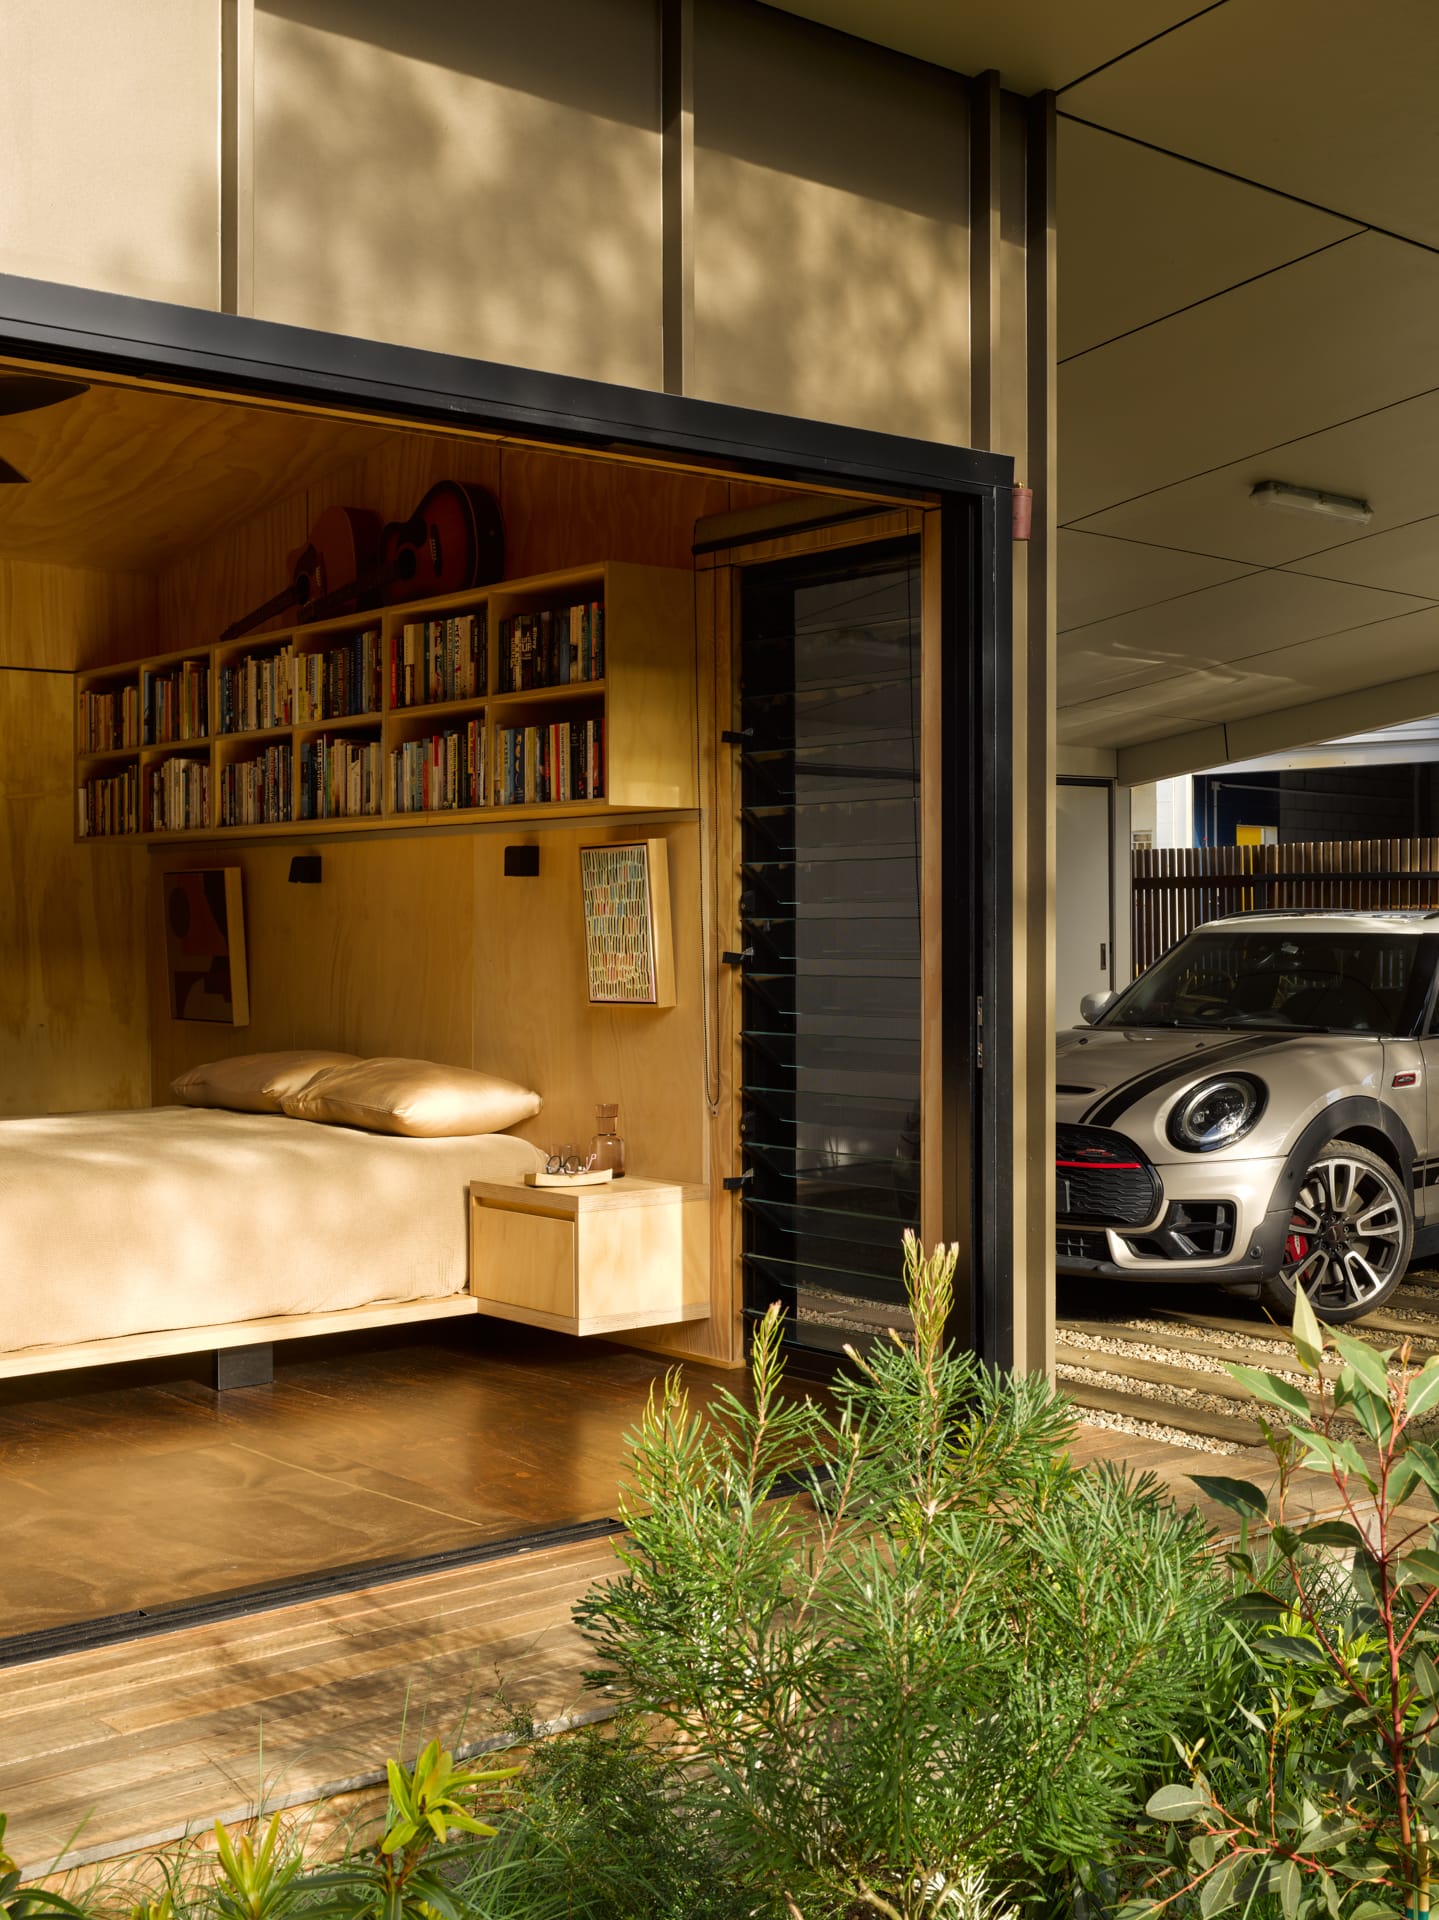 PaperBark Pod by Bark Design. Photography by Christopher Frederick Jones. Interior bedroom opened up onto gardens. Carport with small car to right of image. Bedroom panelled in plywood. 